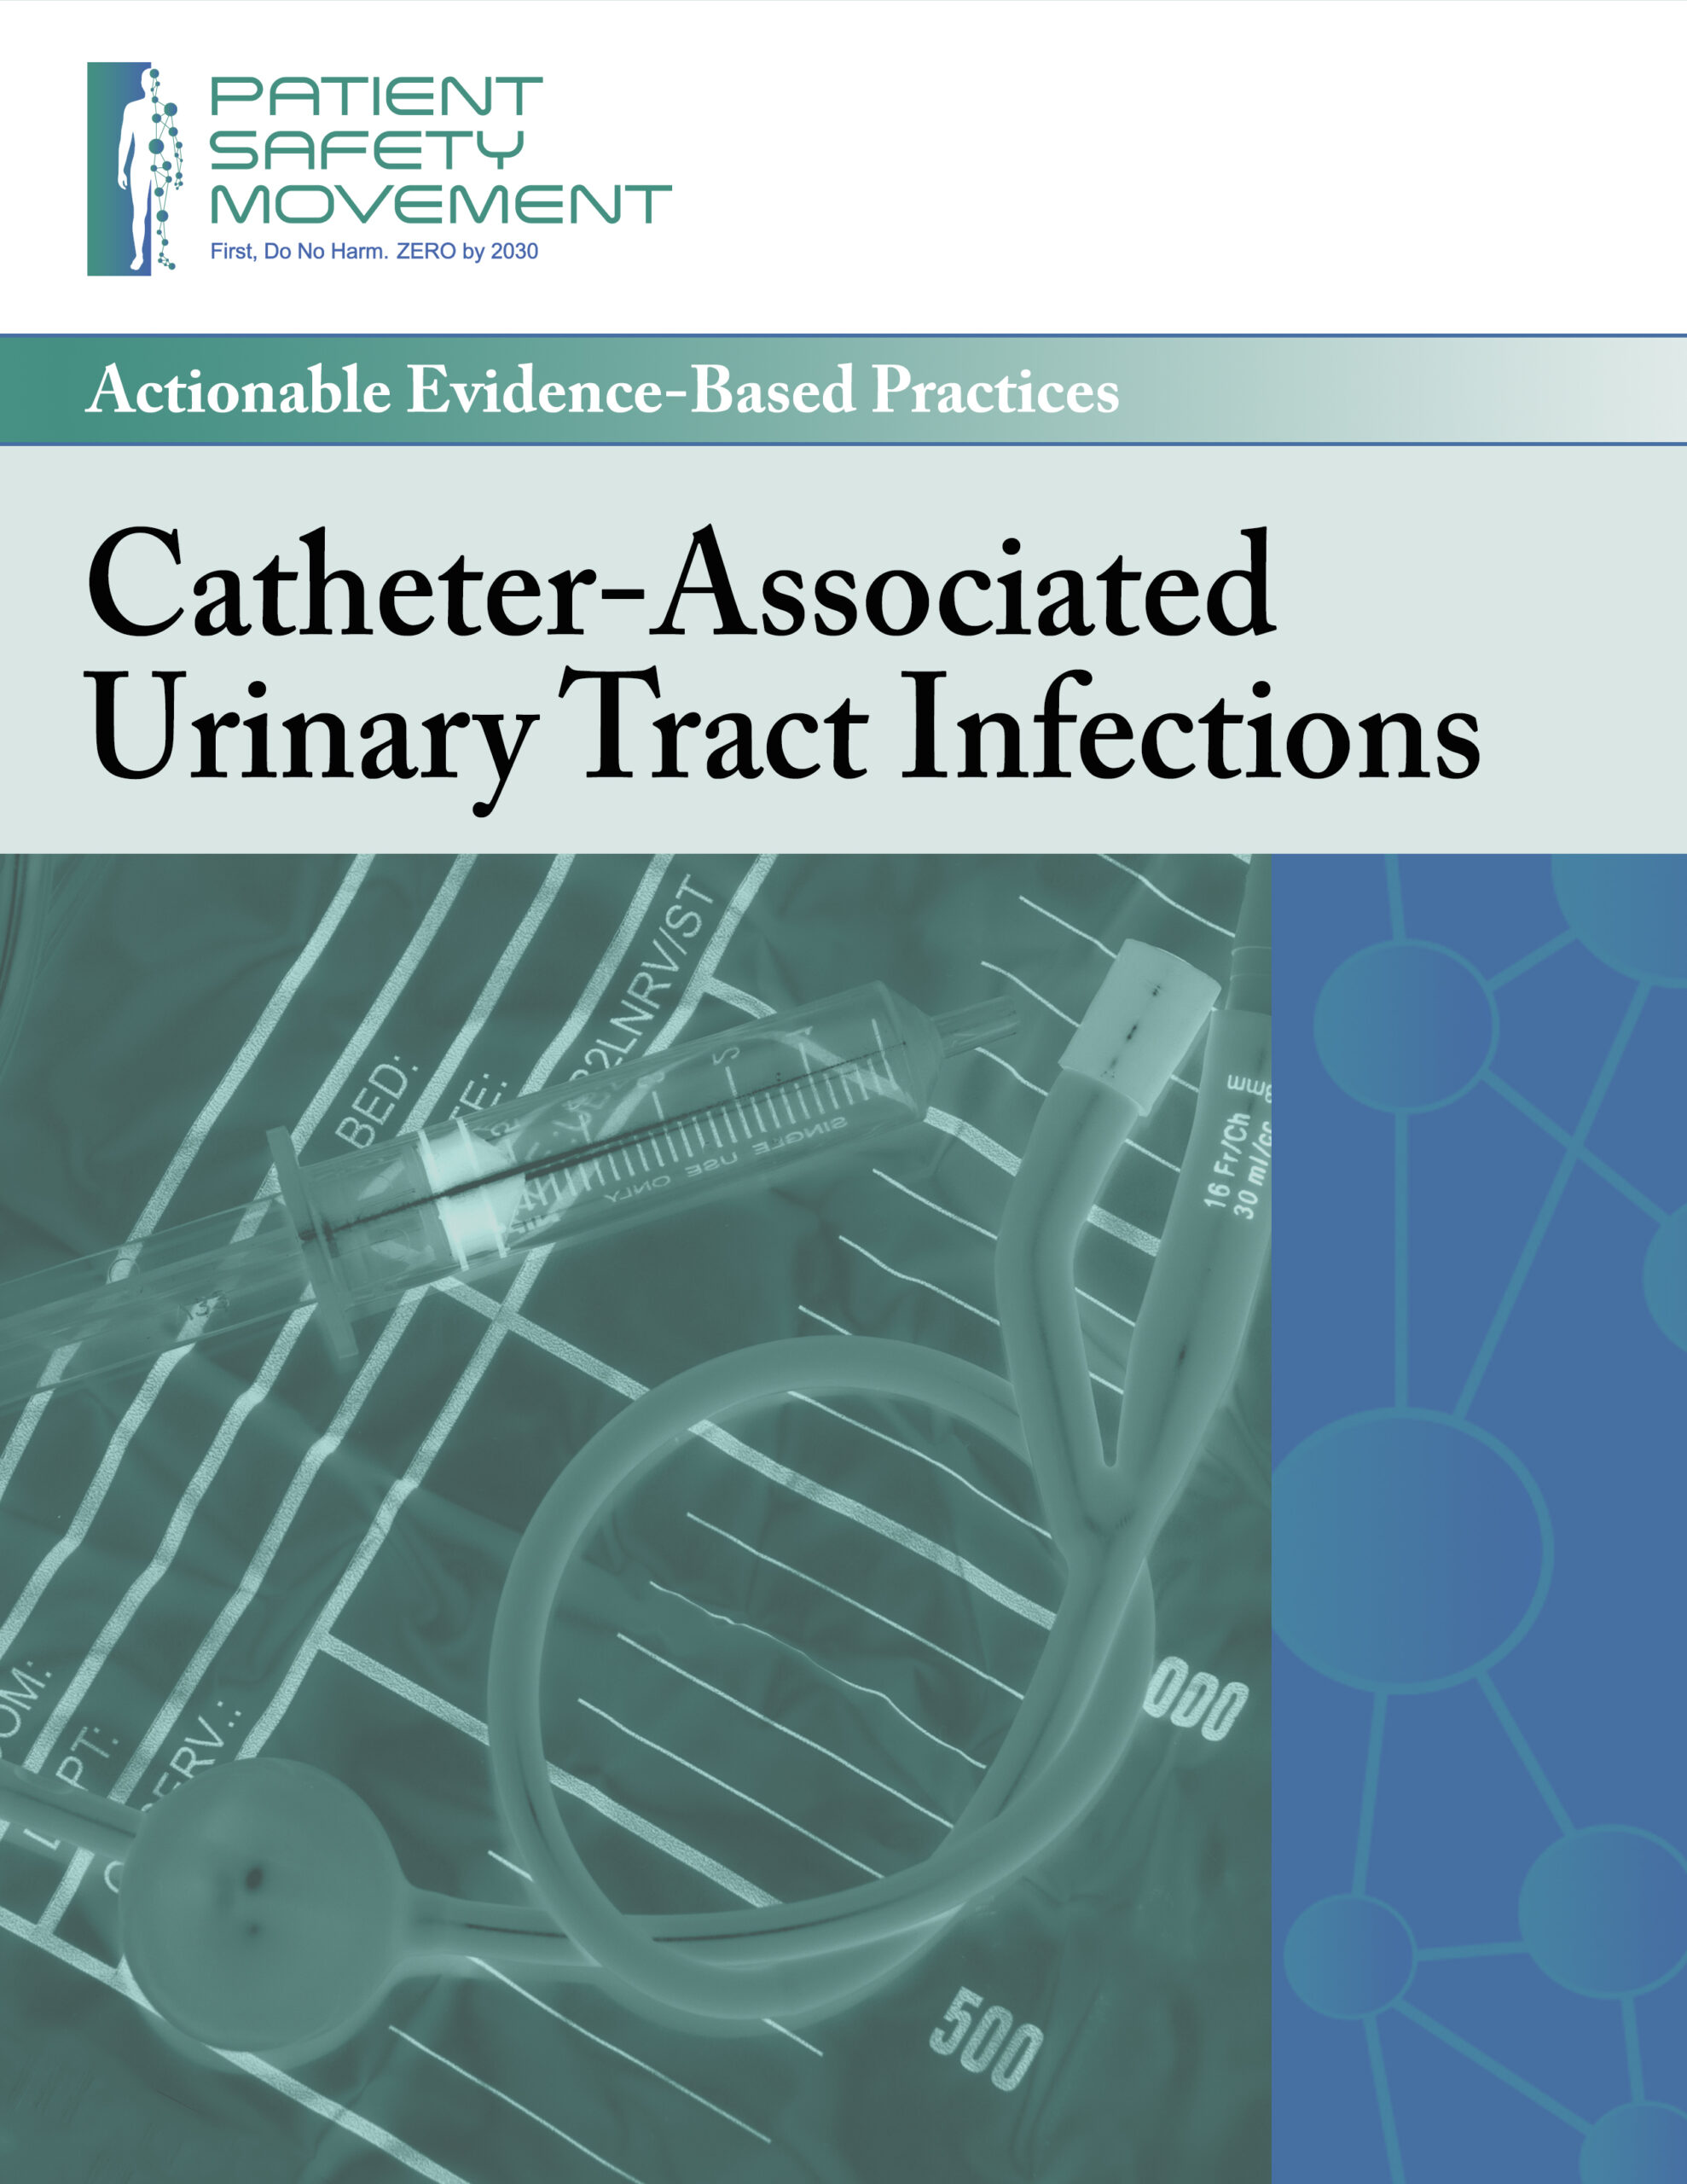 catheter associated urinary tract infections cover 2d scaled